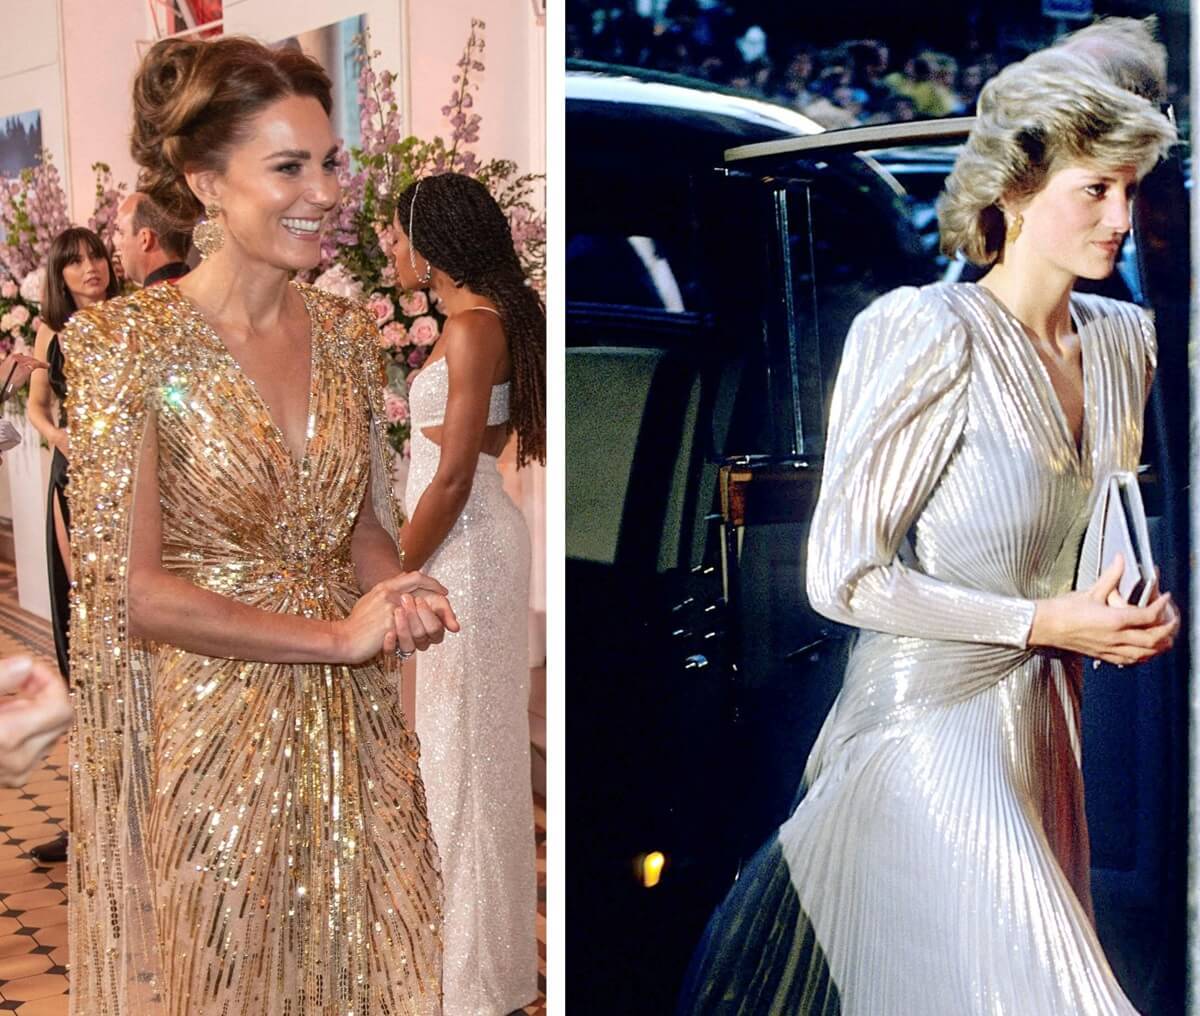 (L) Kate Middleton attends the World Premiere of the James Bond 007 film No Time to Die, (R) Princess Diana attends the premiere of the James Bond film 'A View To a Kill'